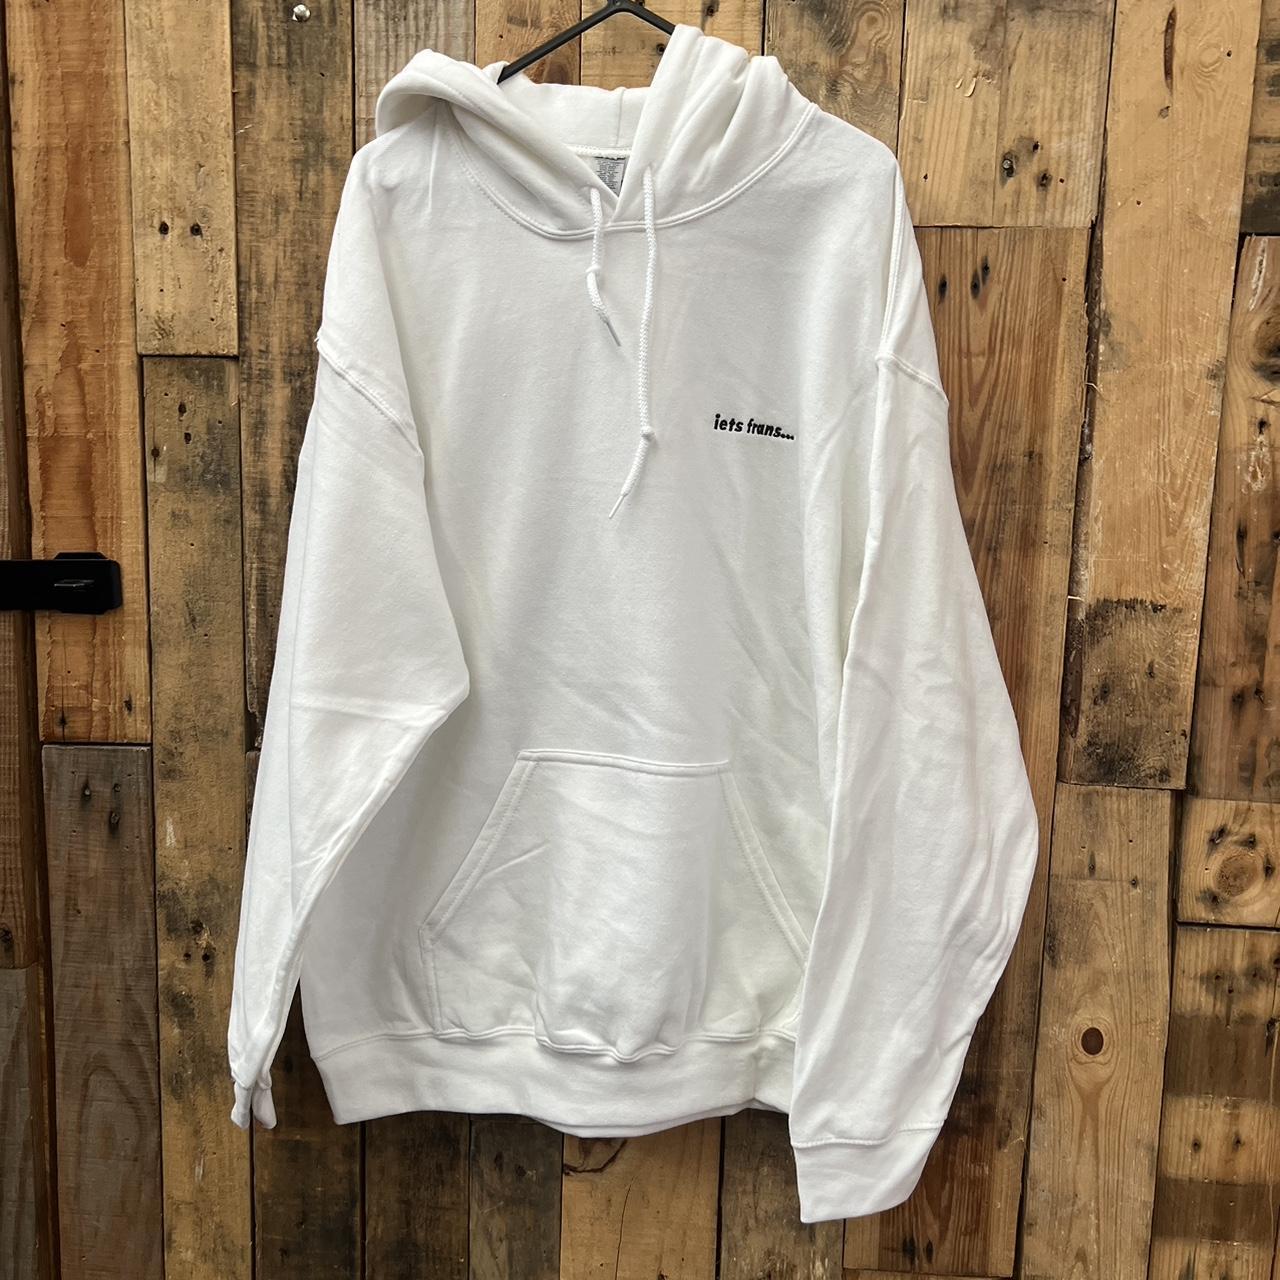 Urban outfitters hoodie Size L Iets frans New no... - Depop